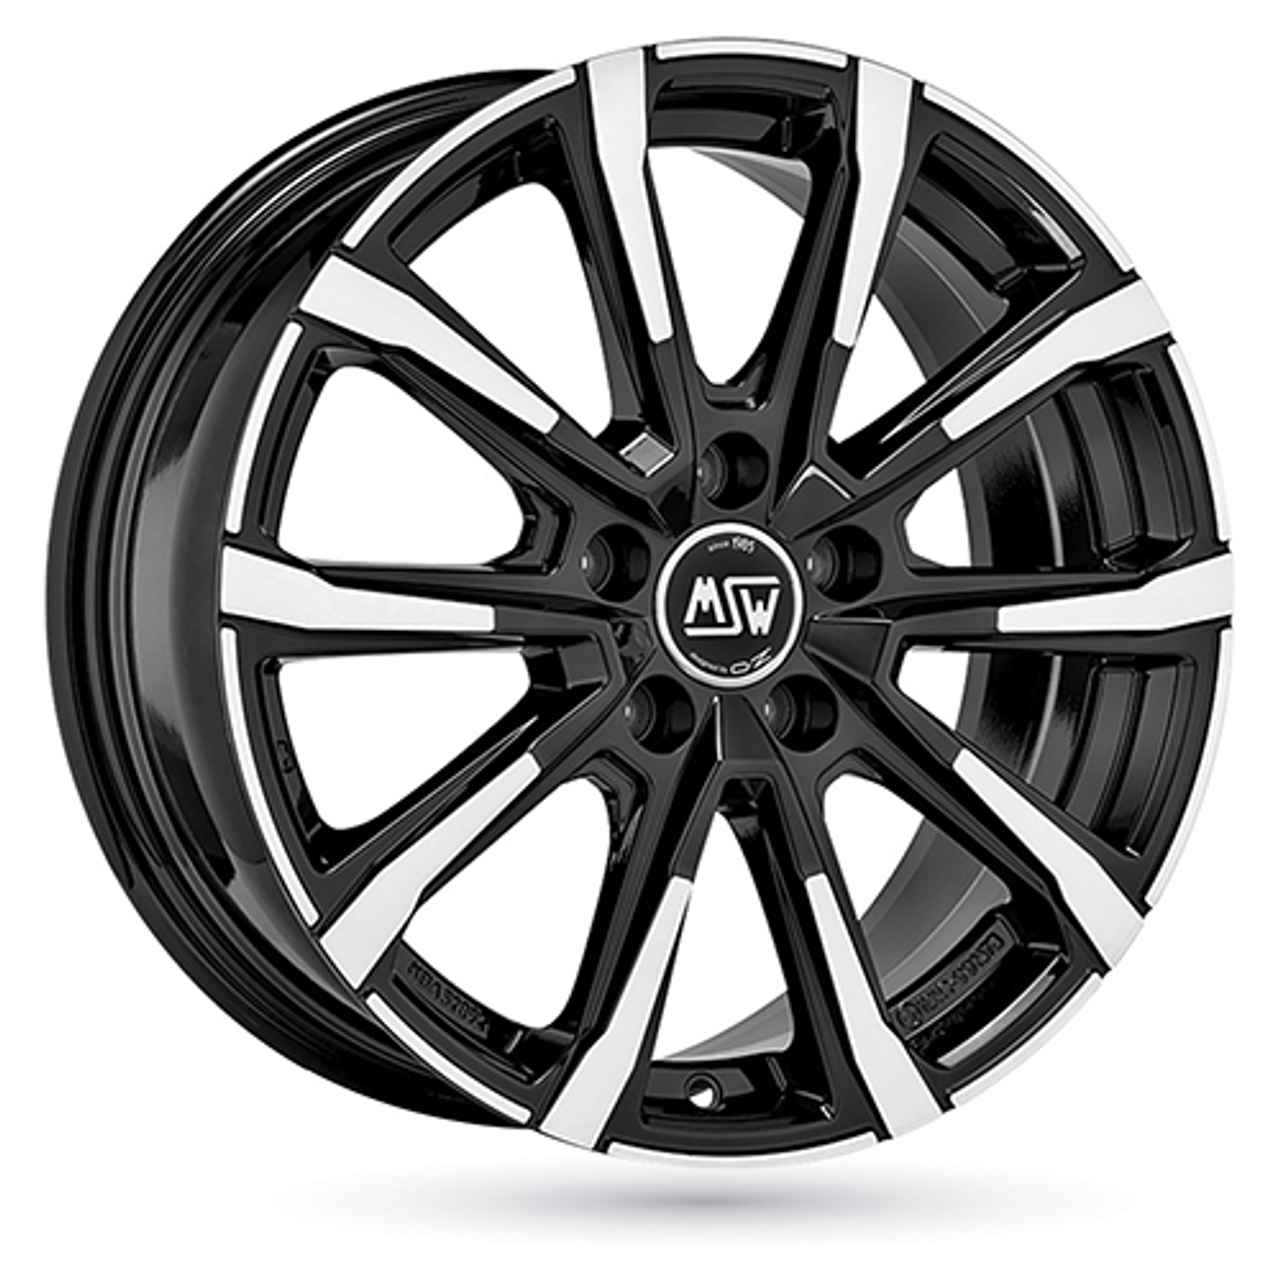 MSW (OZ) MSW 79 gloss black full polished 7.0Jx18 5x112 ET45